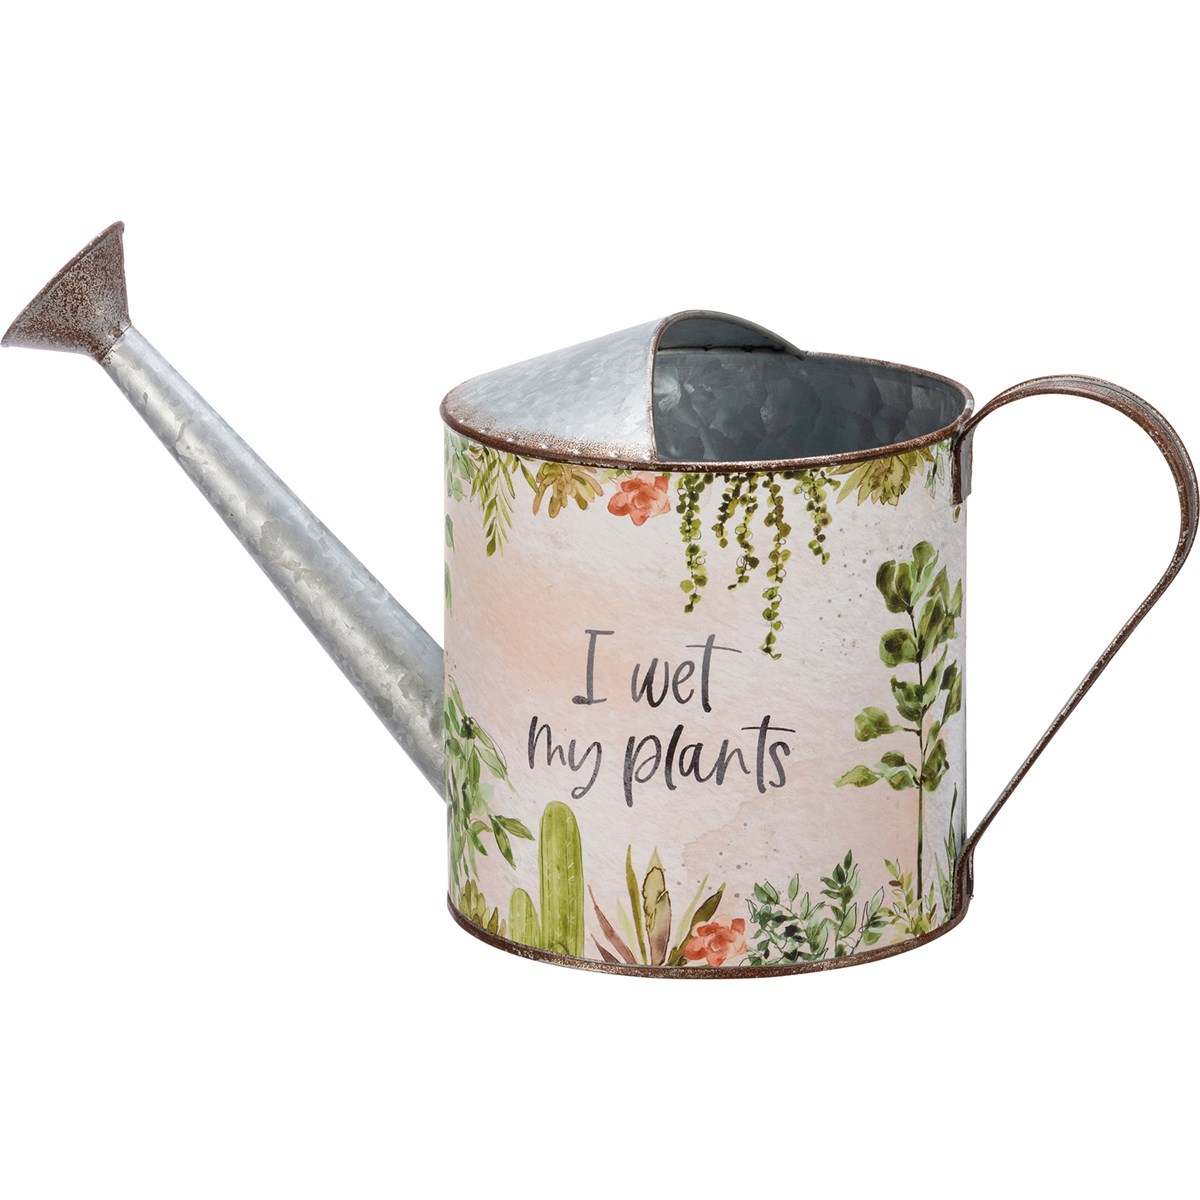 Watering Can - I Wet My Plants - 9.50" x 5.75" x 6.25" - Metal, Paper